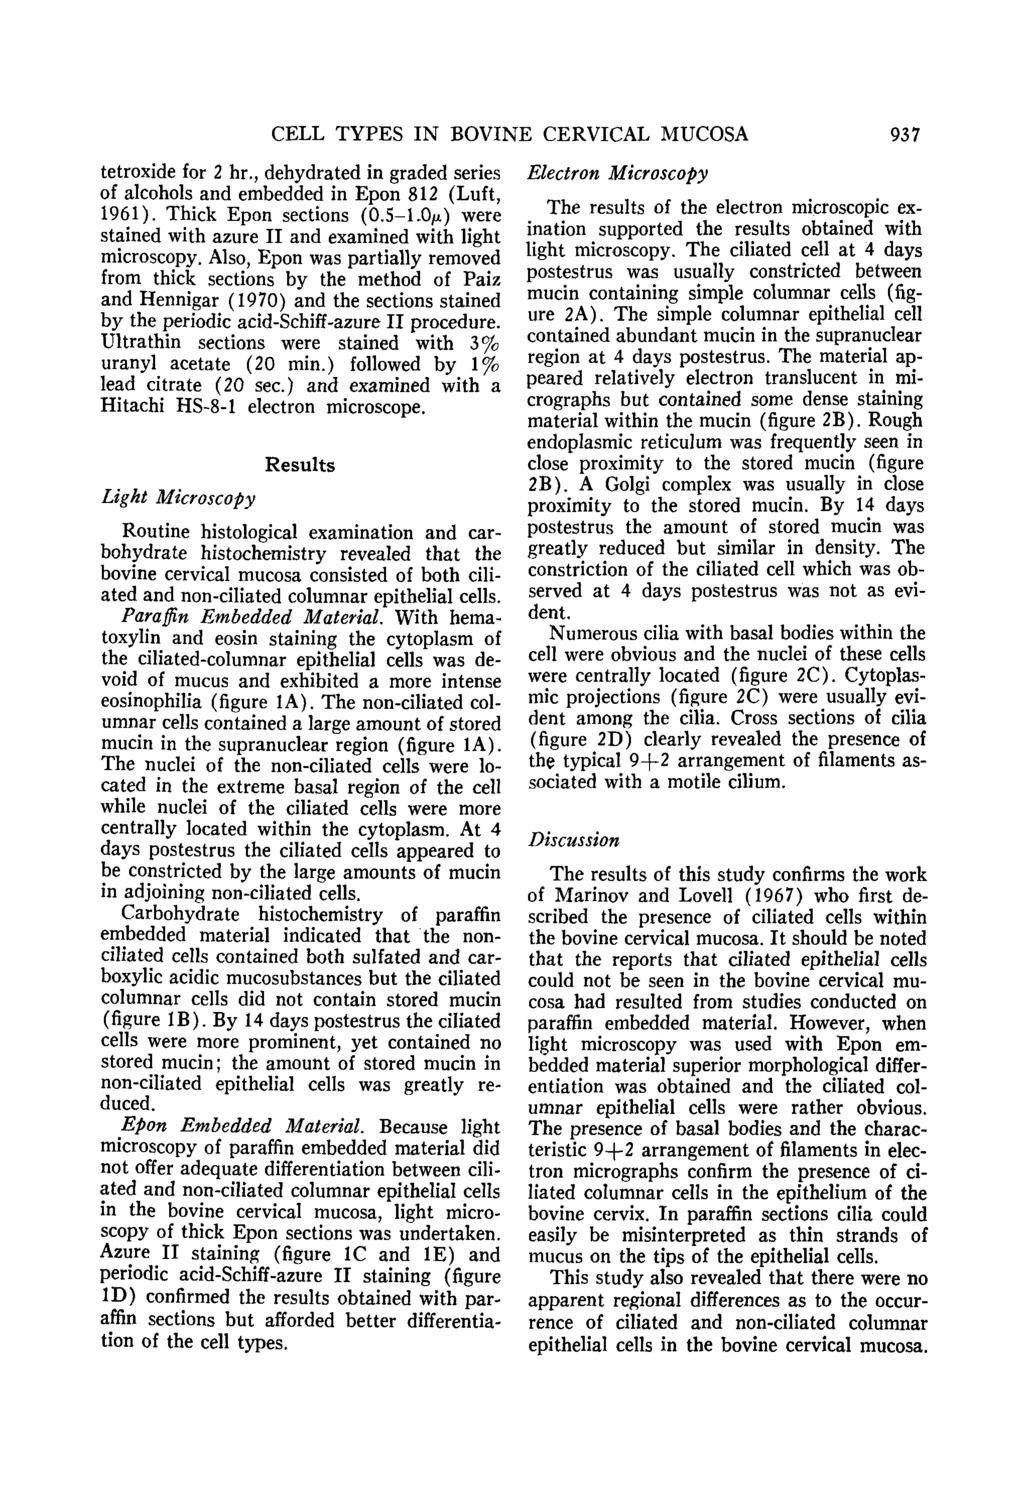 CELL TYPES IN BOVINE CERVICAL MUCOSA 937 tetroxide for 2 hr., dehydrated in graded series of alcohols and embedded in Epon 812 (Luft, 1961). Thick Epon sections (0.5-1.